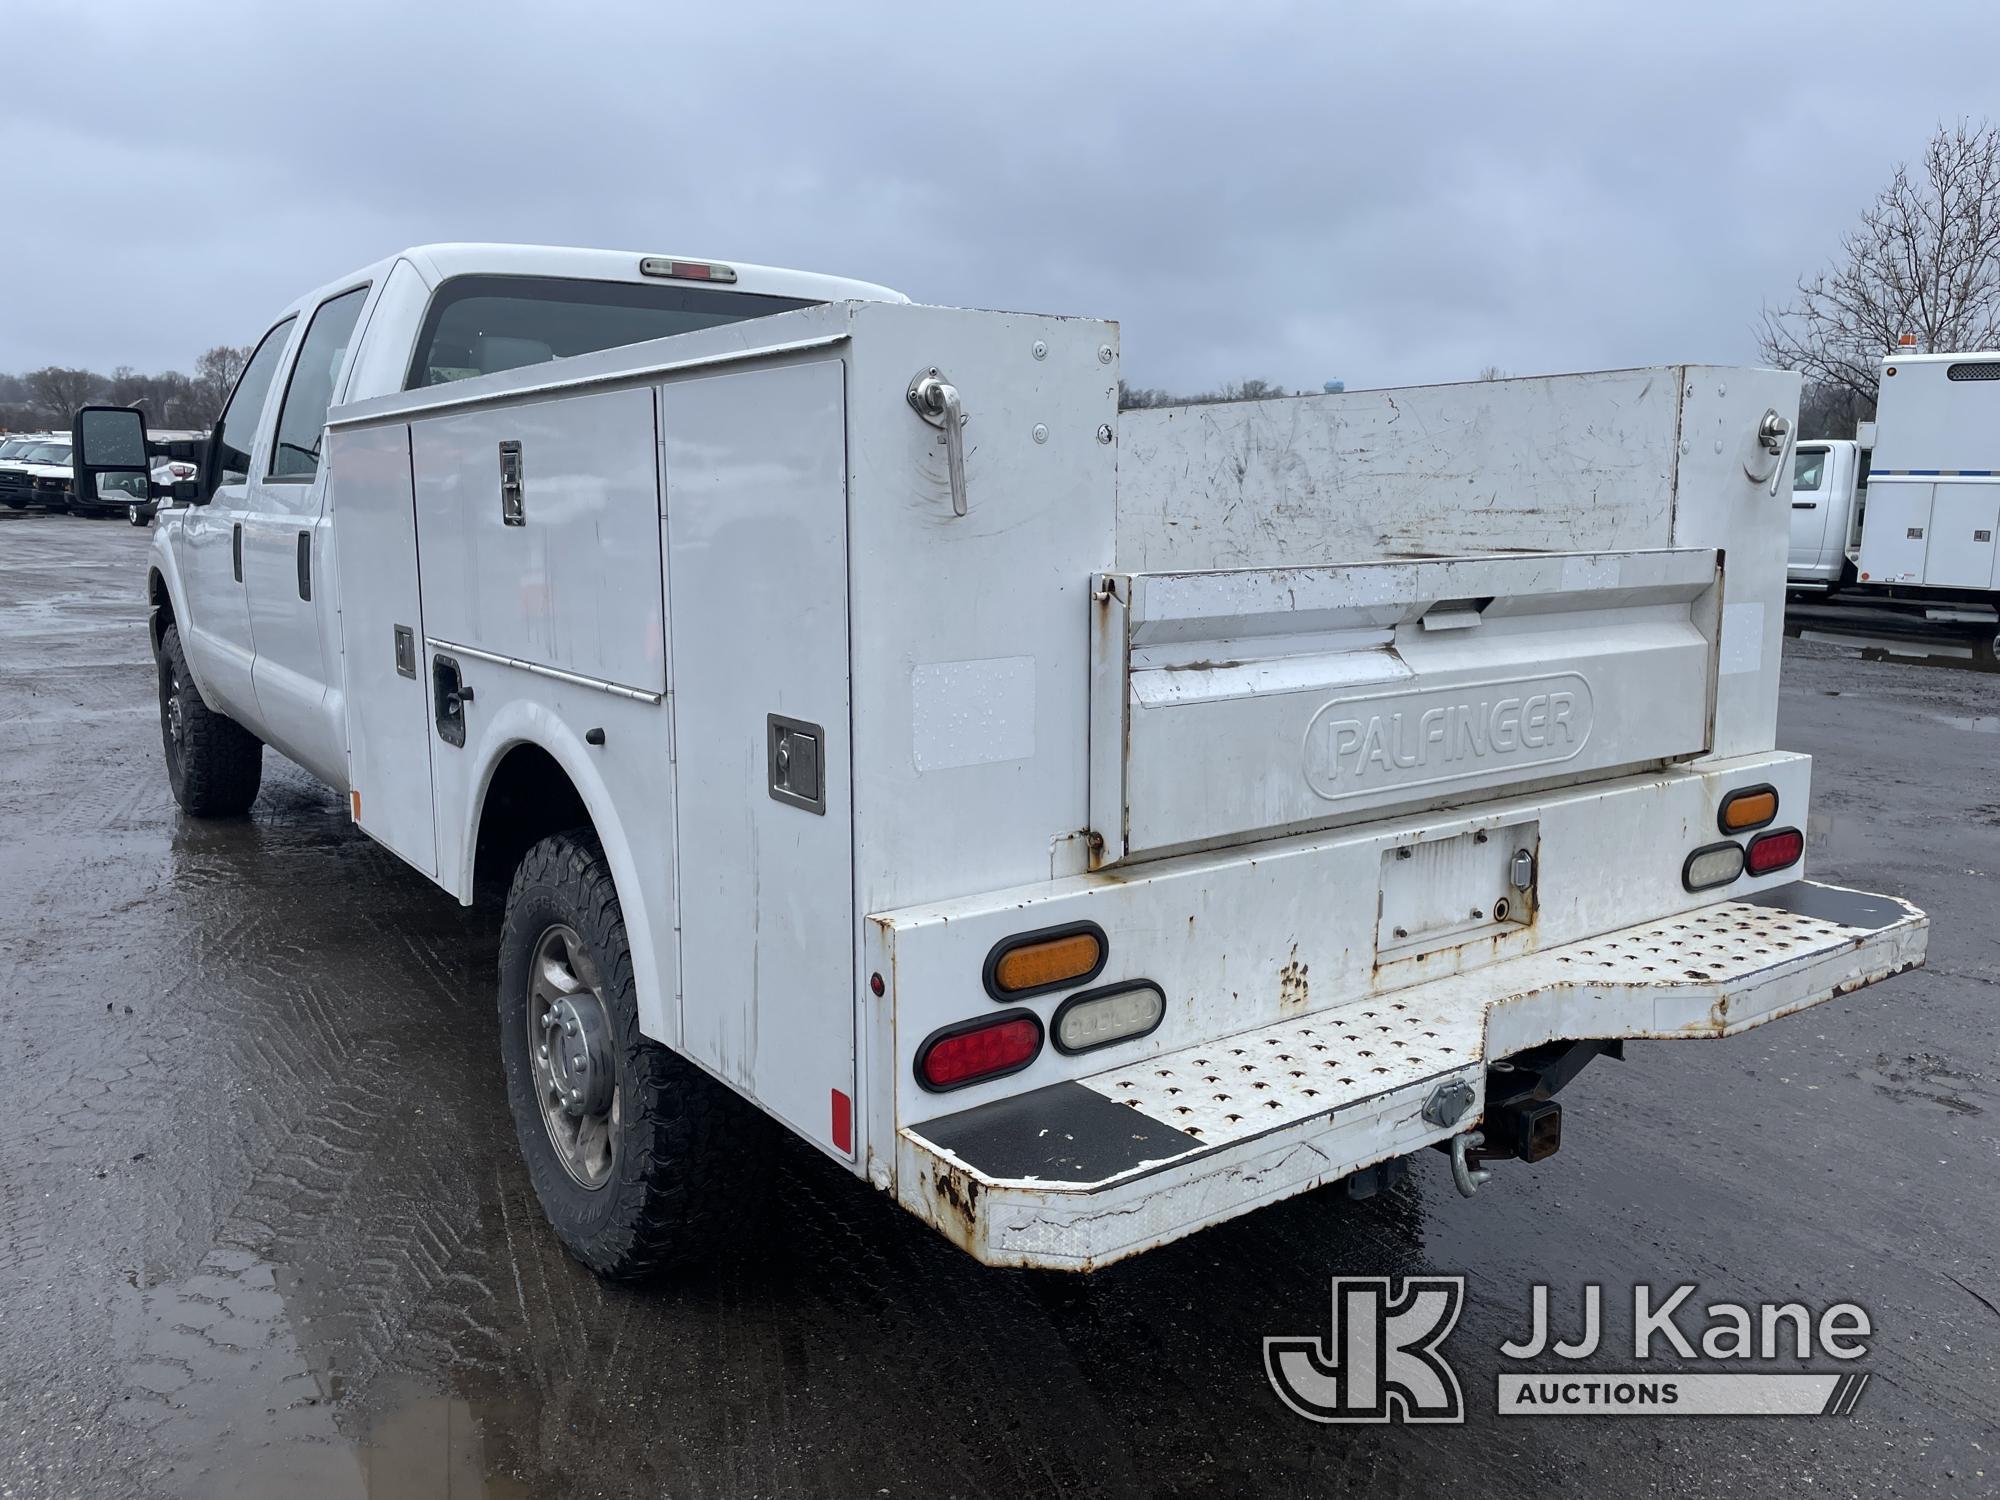 (Plymouth Meeting, PA) 2016 Ford F250 4x4 Crew-Cab Service Truck Runs & Moves, Body& Rust Damage